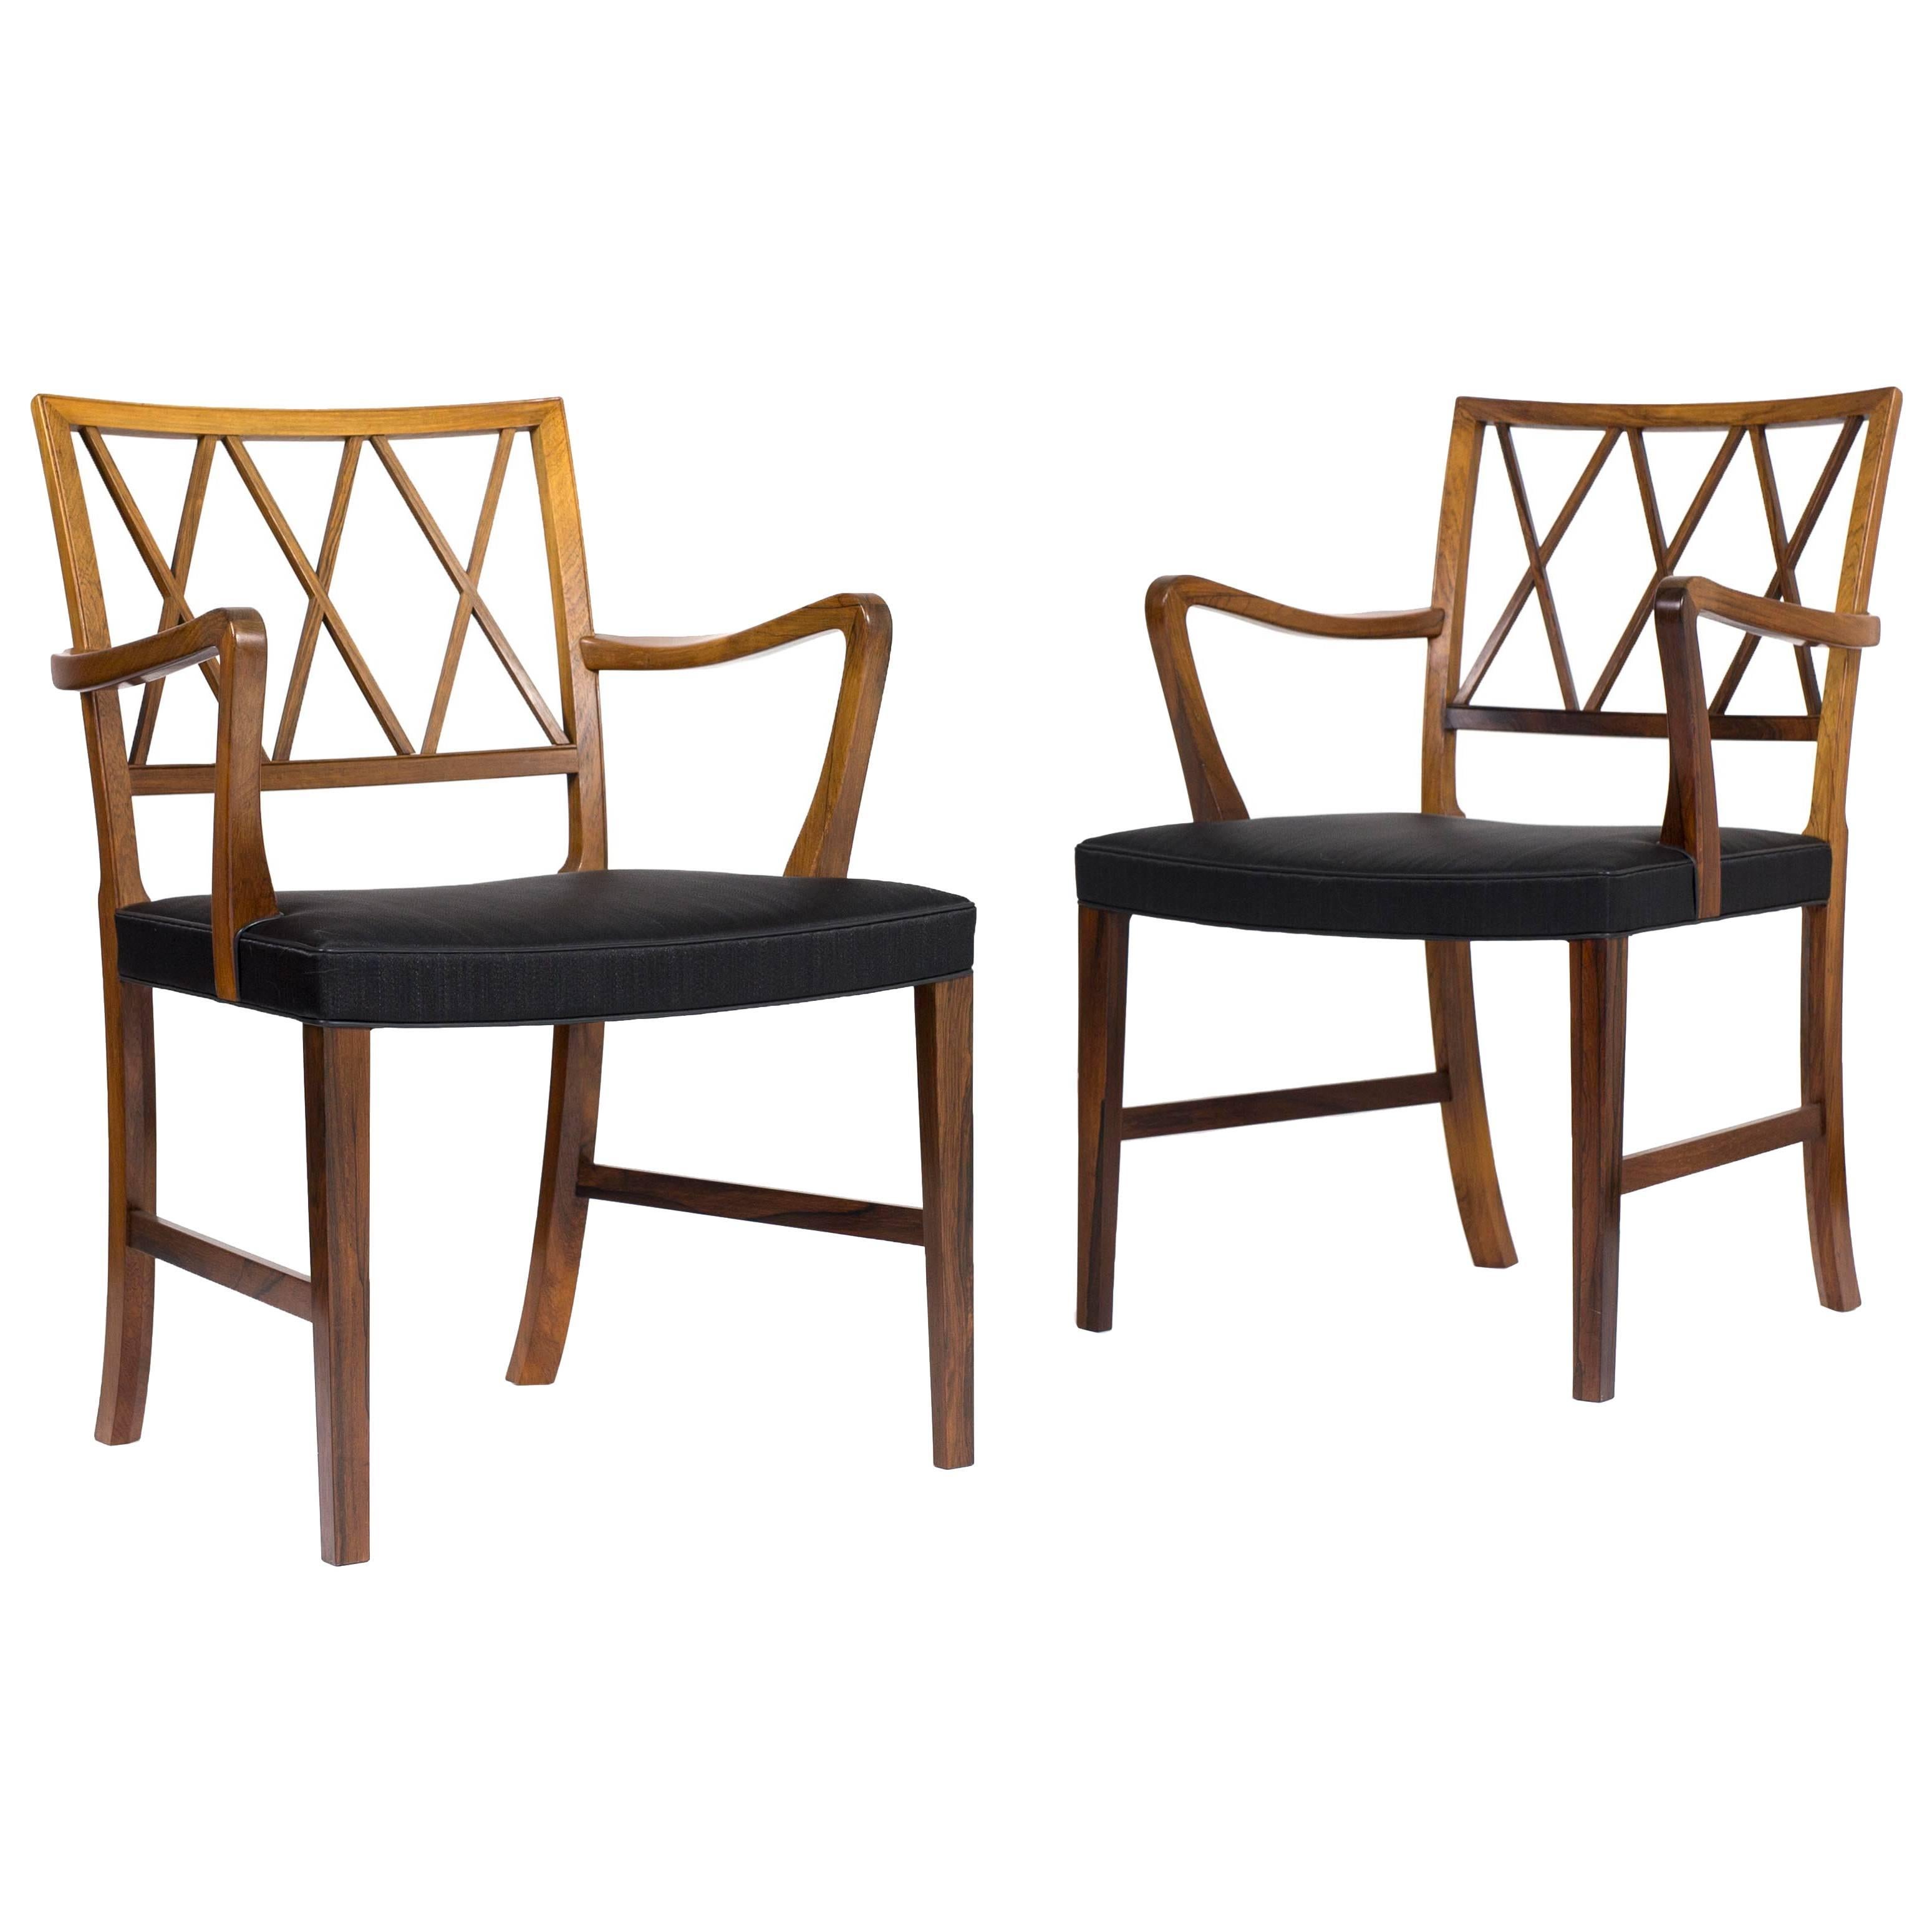 Ole Wanscher, Pair of Rosewood Armchairs for A. J. Iversen 